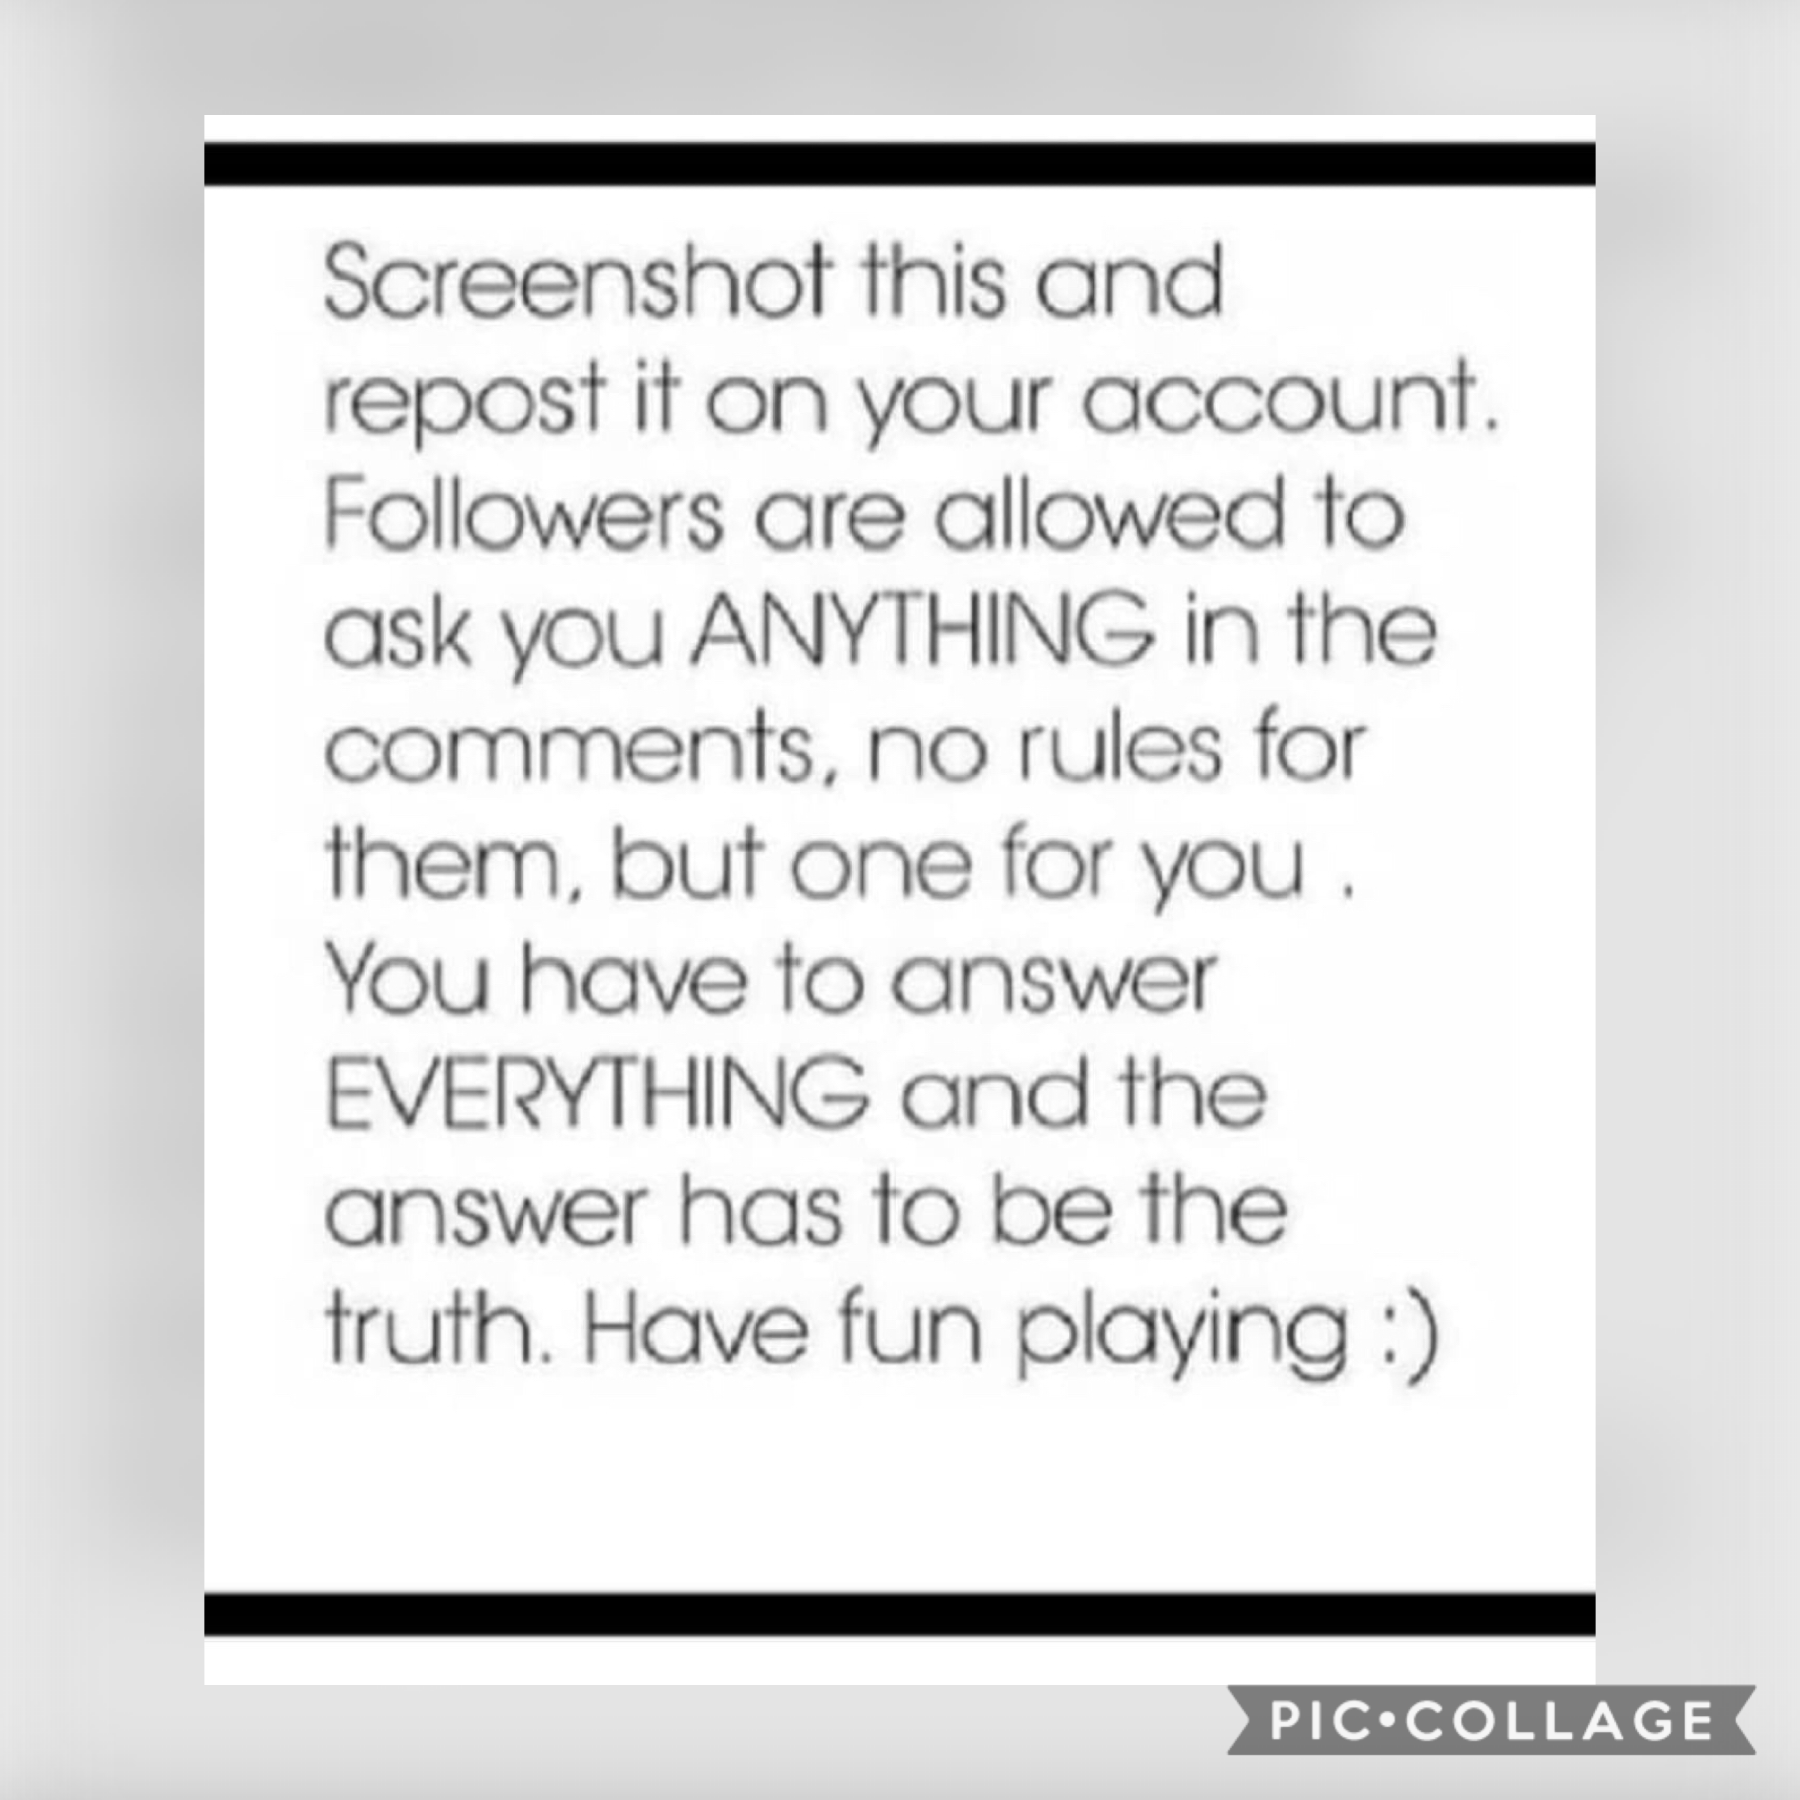 Go guys, so what do you want to ask me???😊